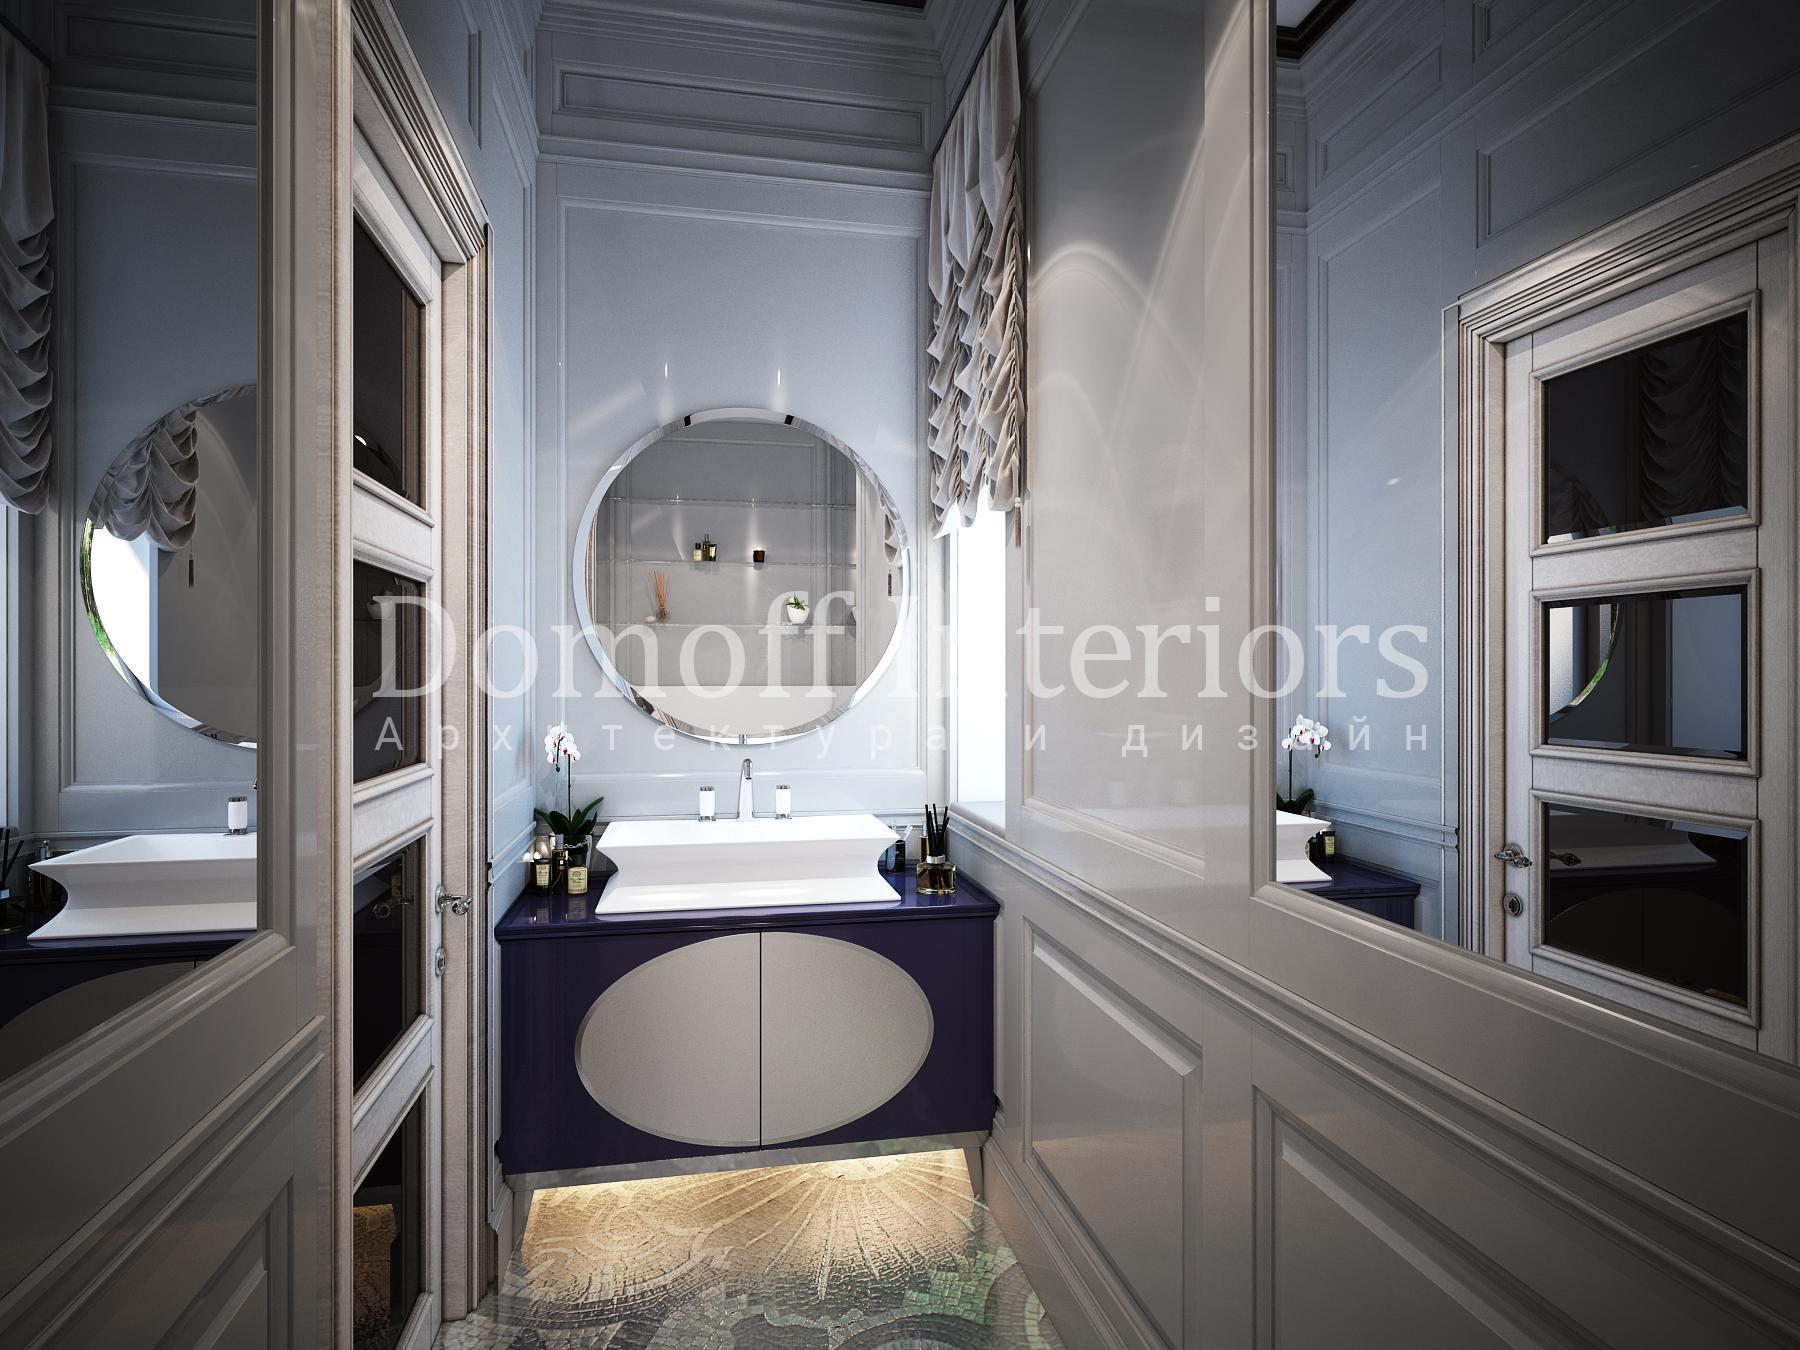 Bathroom No. 1 made in the style of Eclecticism Contemporary classics